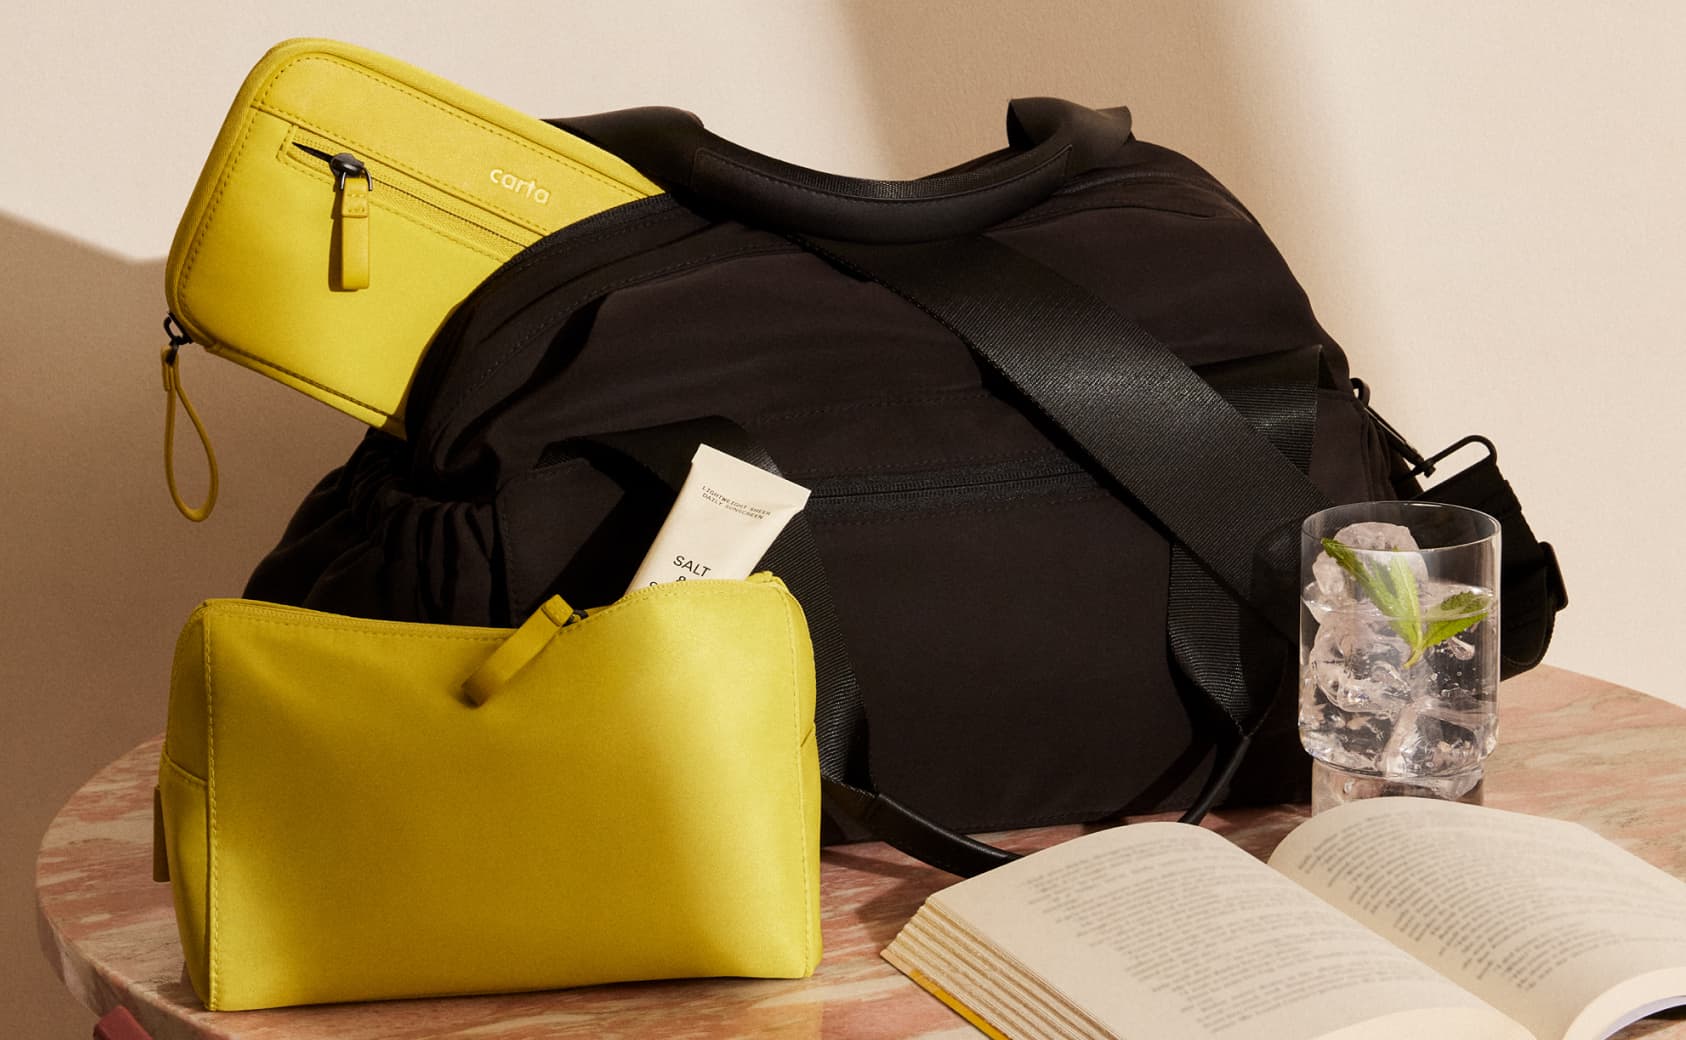 Duffle bag and other travel accessories by carta.